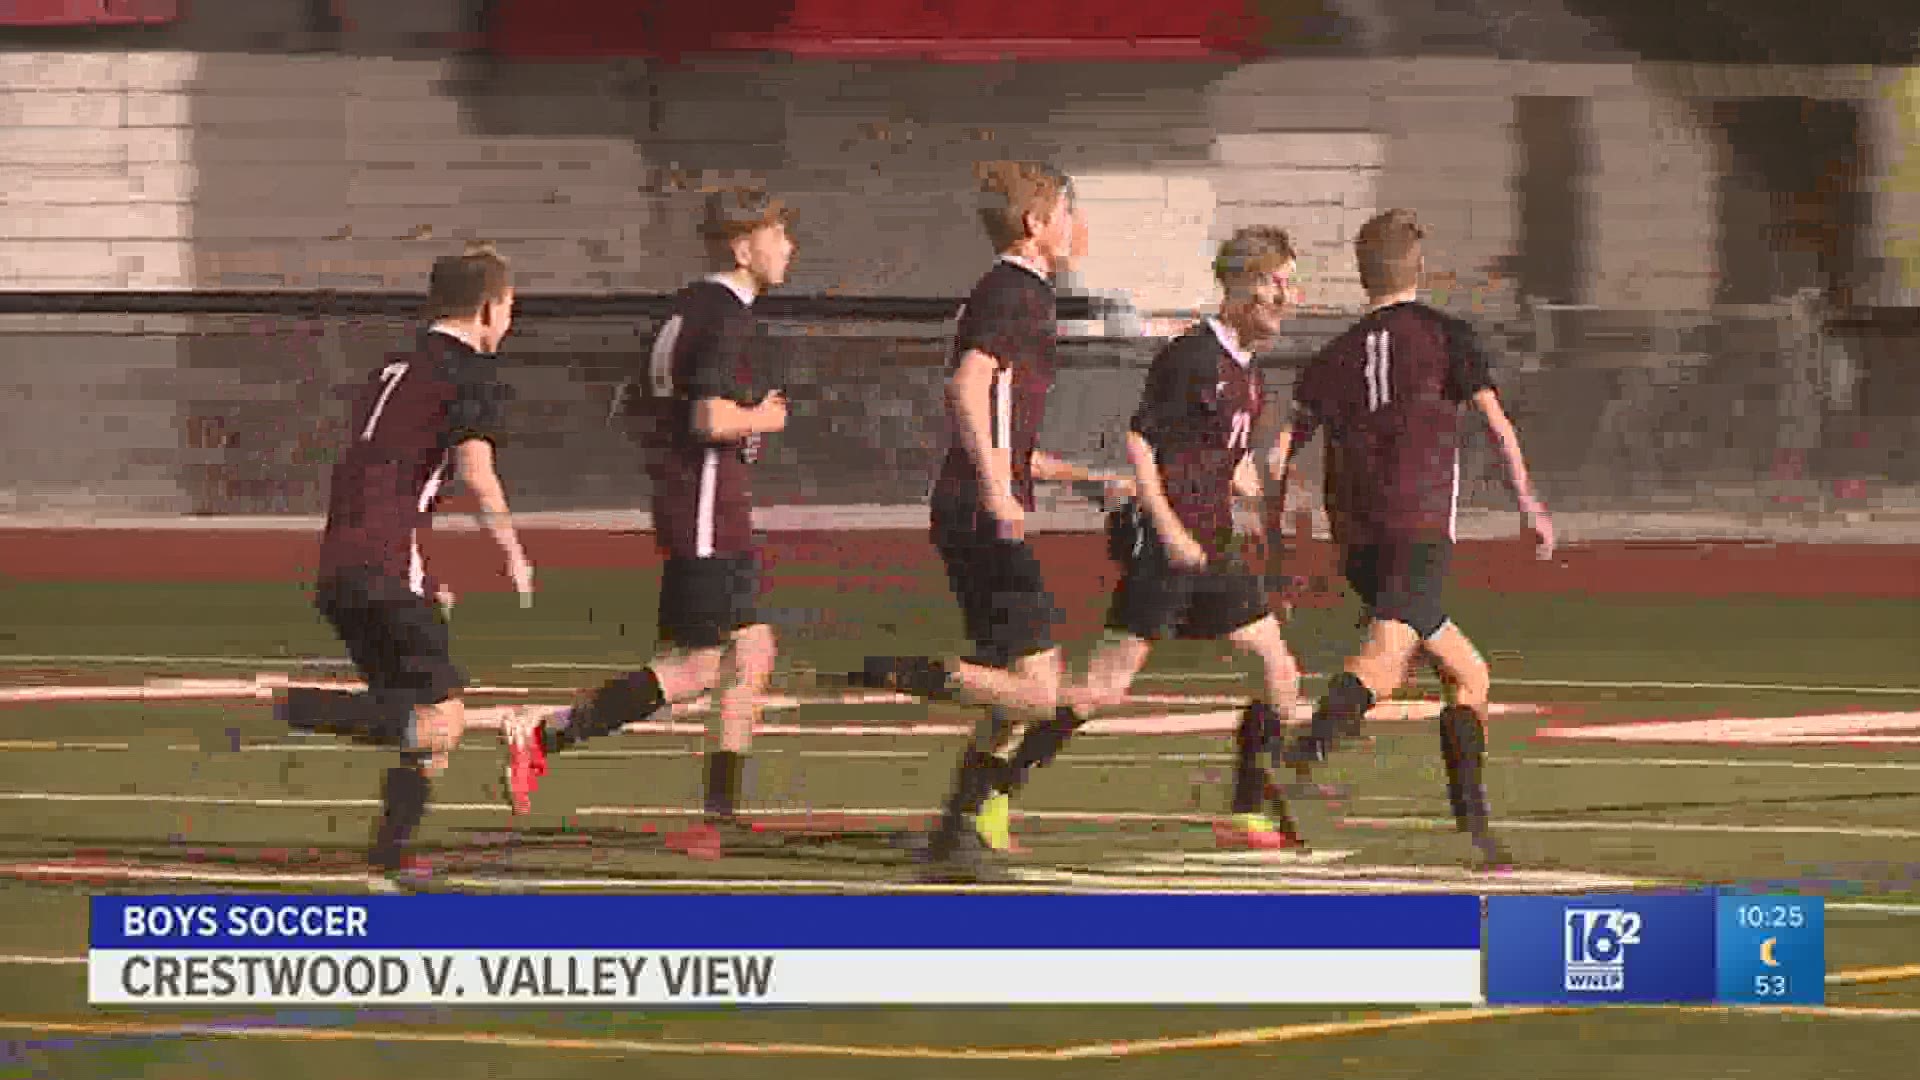 Crestwood vs Valley View boy's soccer championship game